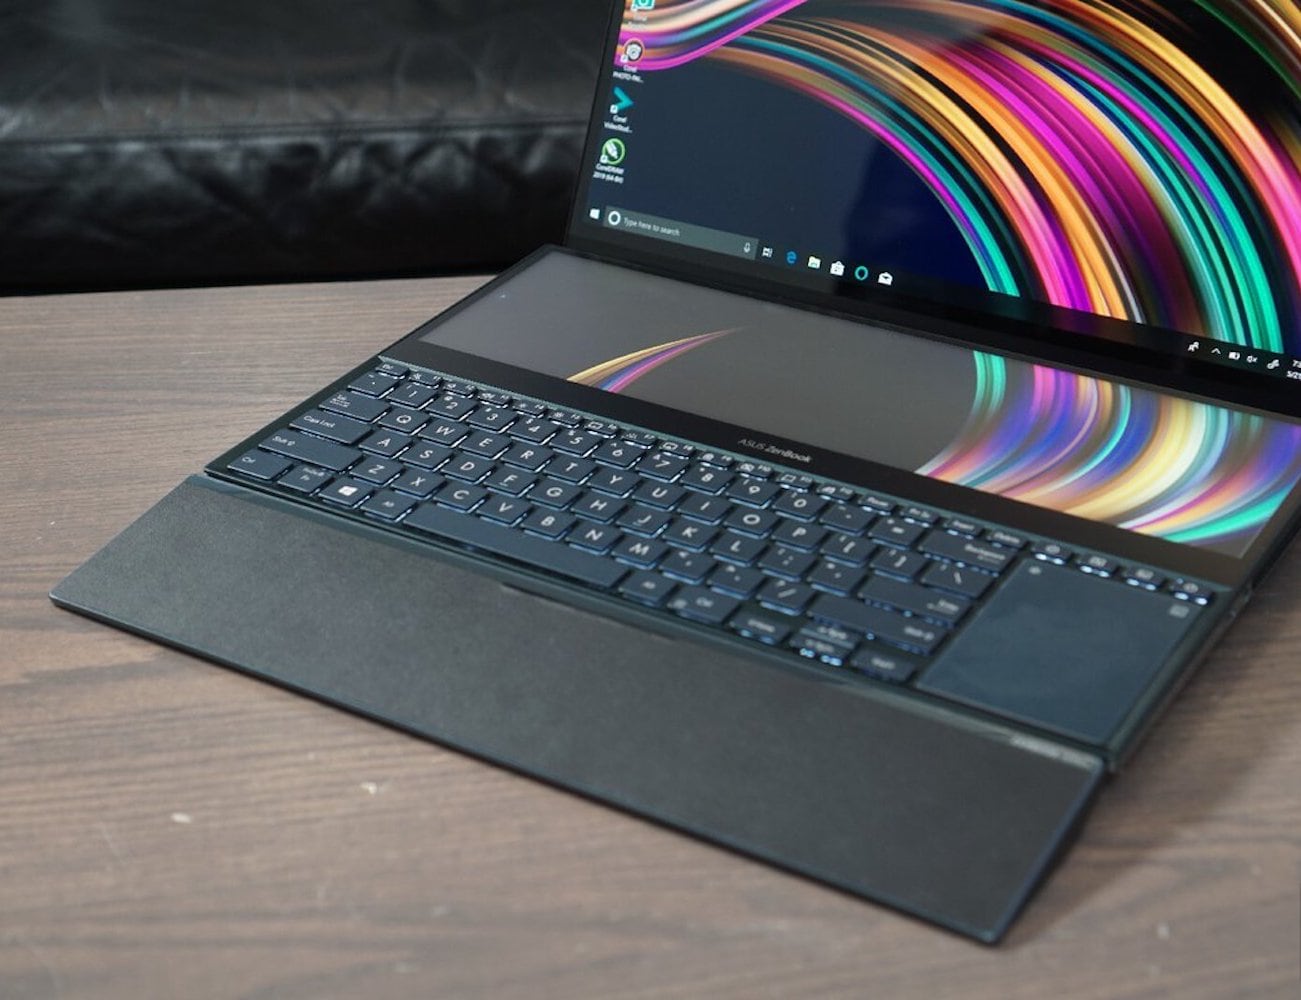 The best new tech revealed at Computex 2019 - Asus ZenBook Pro 02